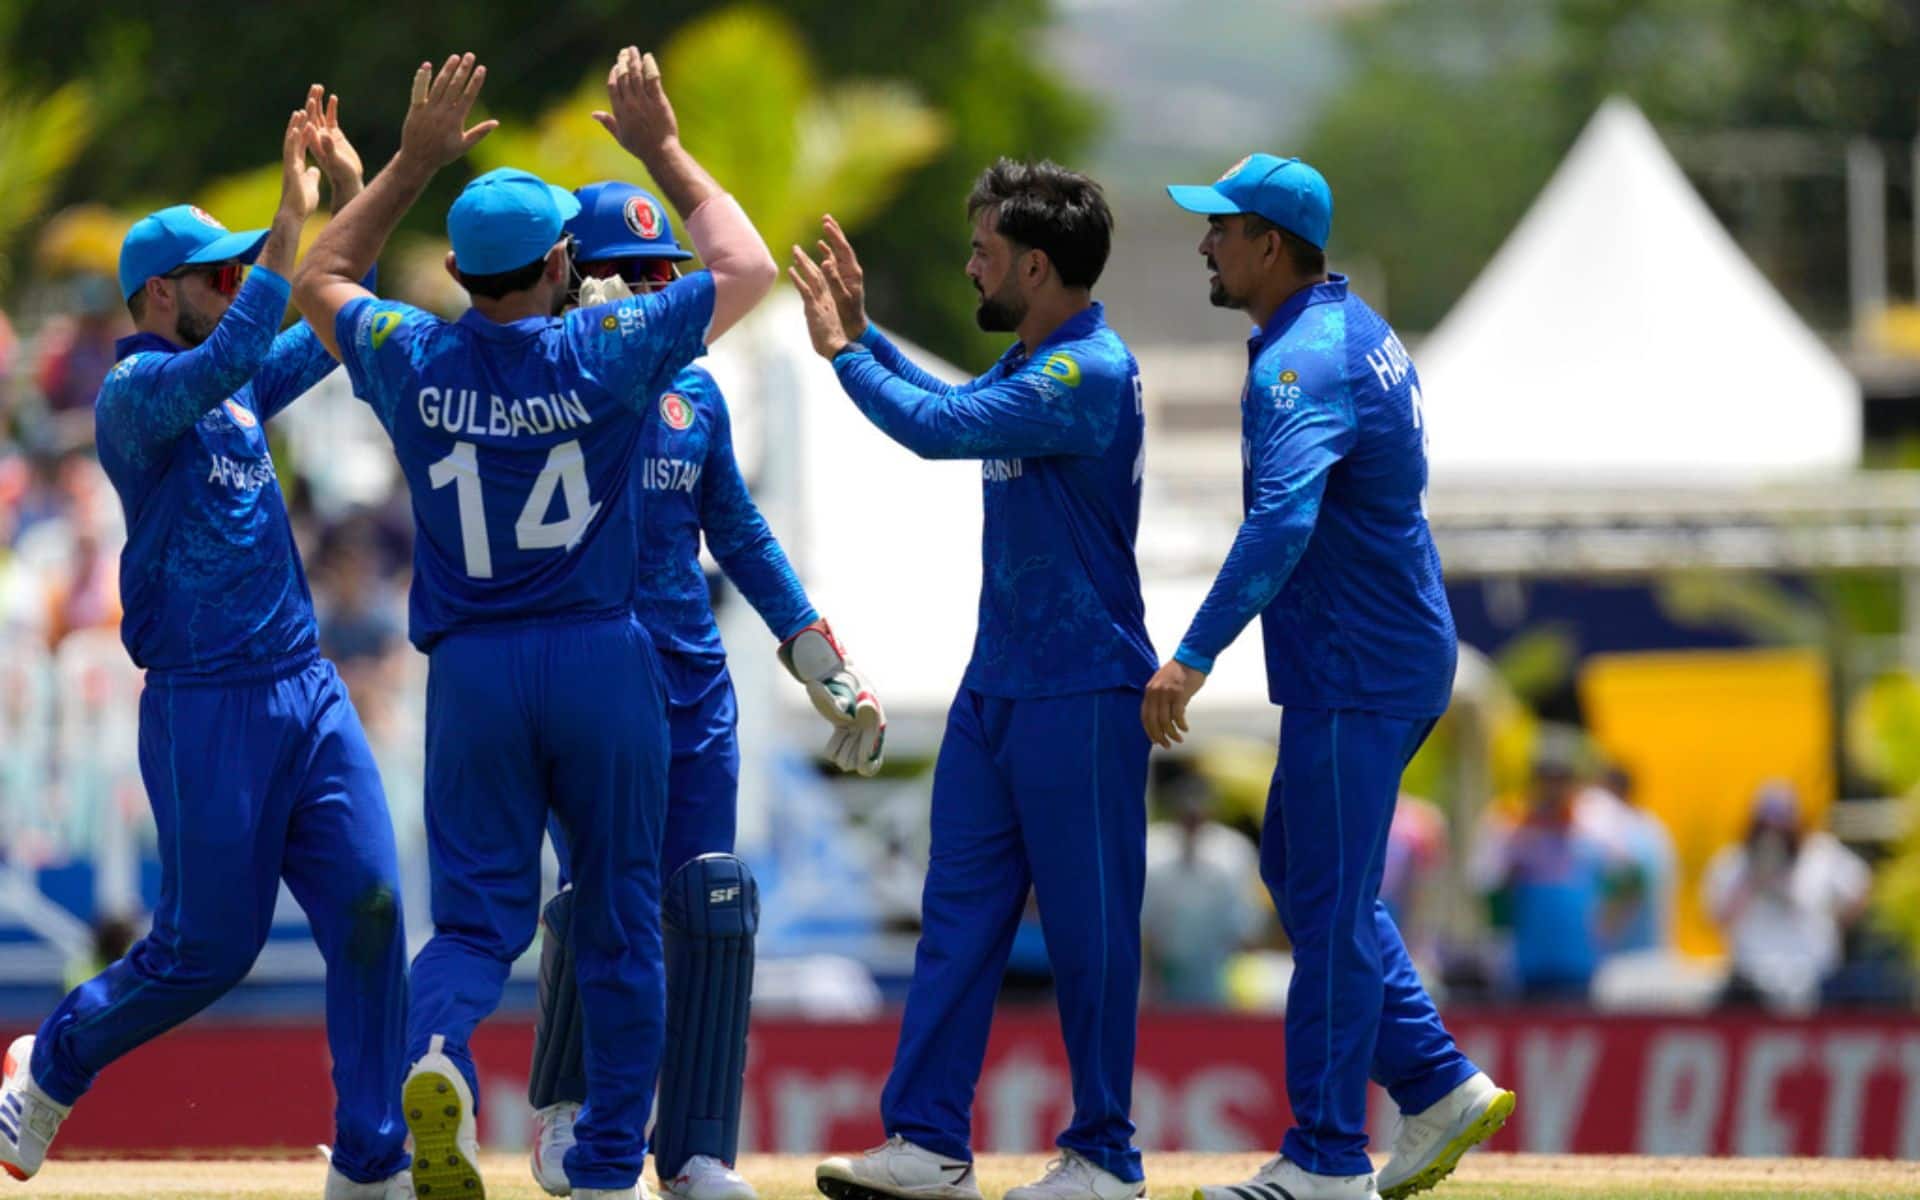 Afghanistan has a great chance to qualify for the semis [X]